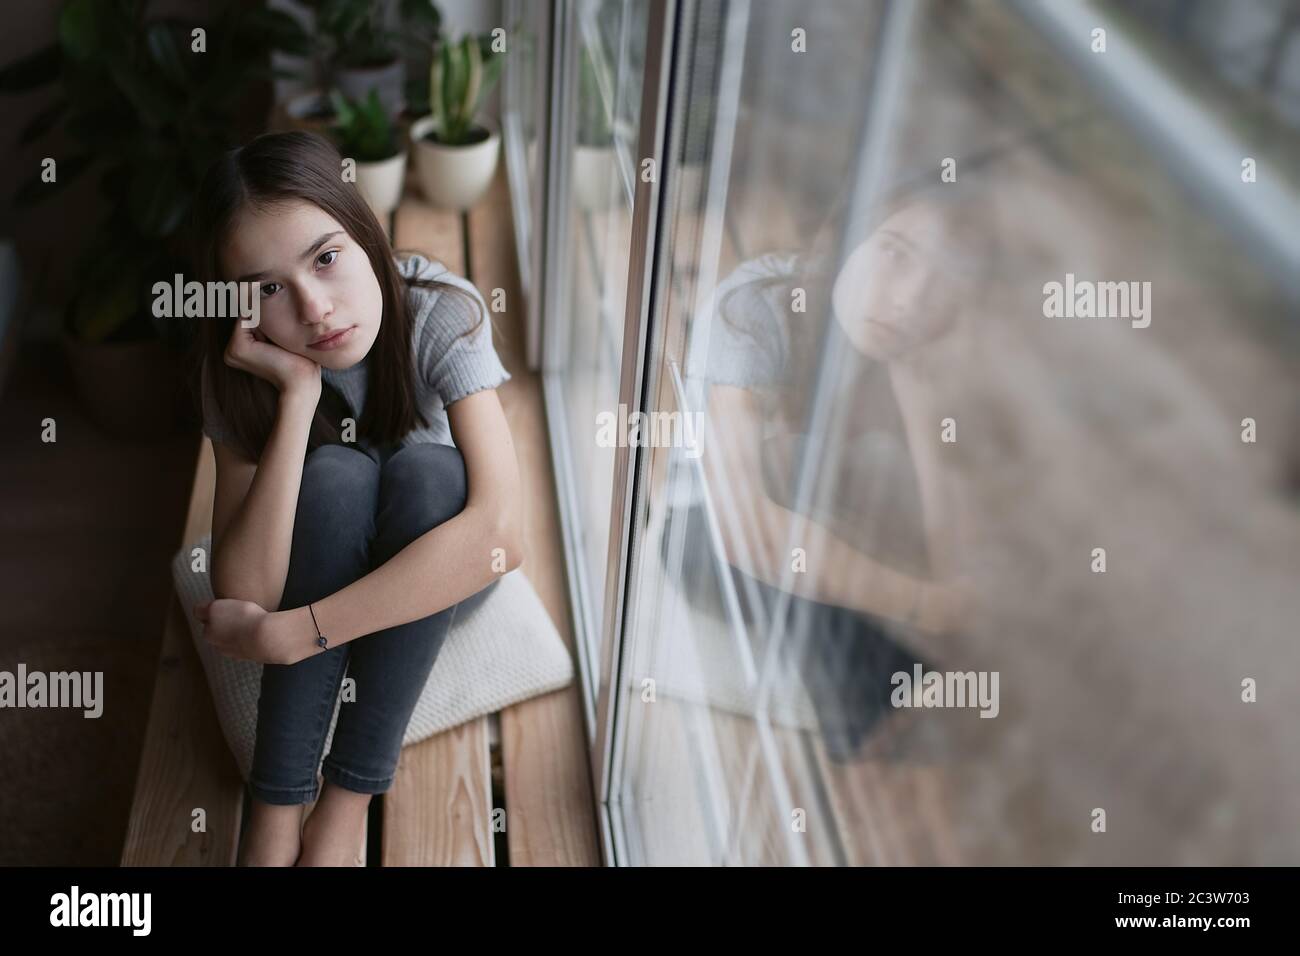 Sad teenager feeling bad alone, feeling depressed, regrets of mistake, having problems, adolescent girl with broken heart Stock Photo